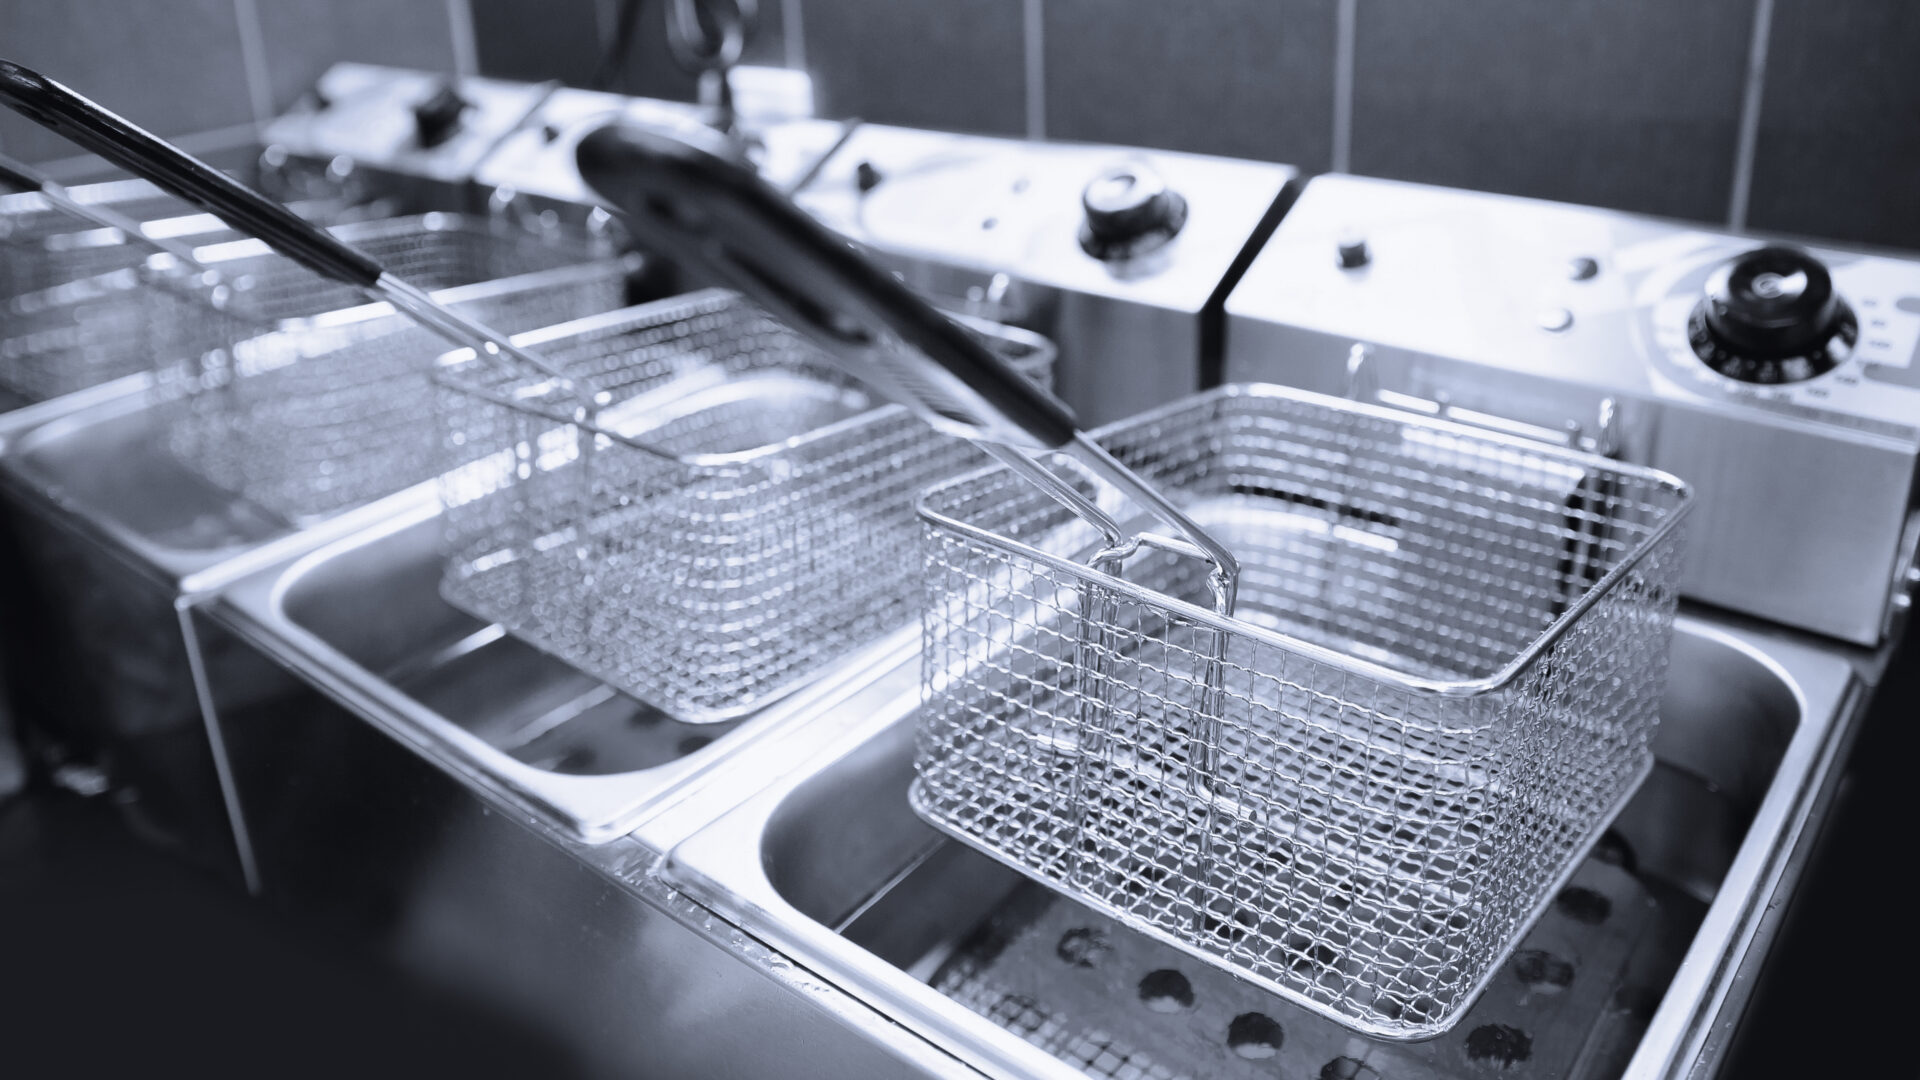 A row of baskets in an industrial kitchen.